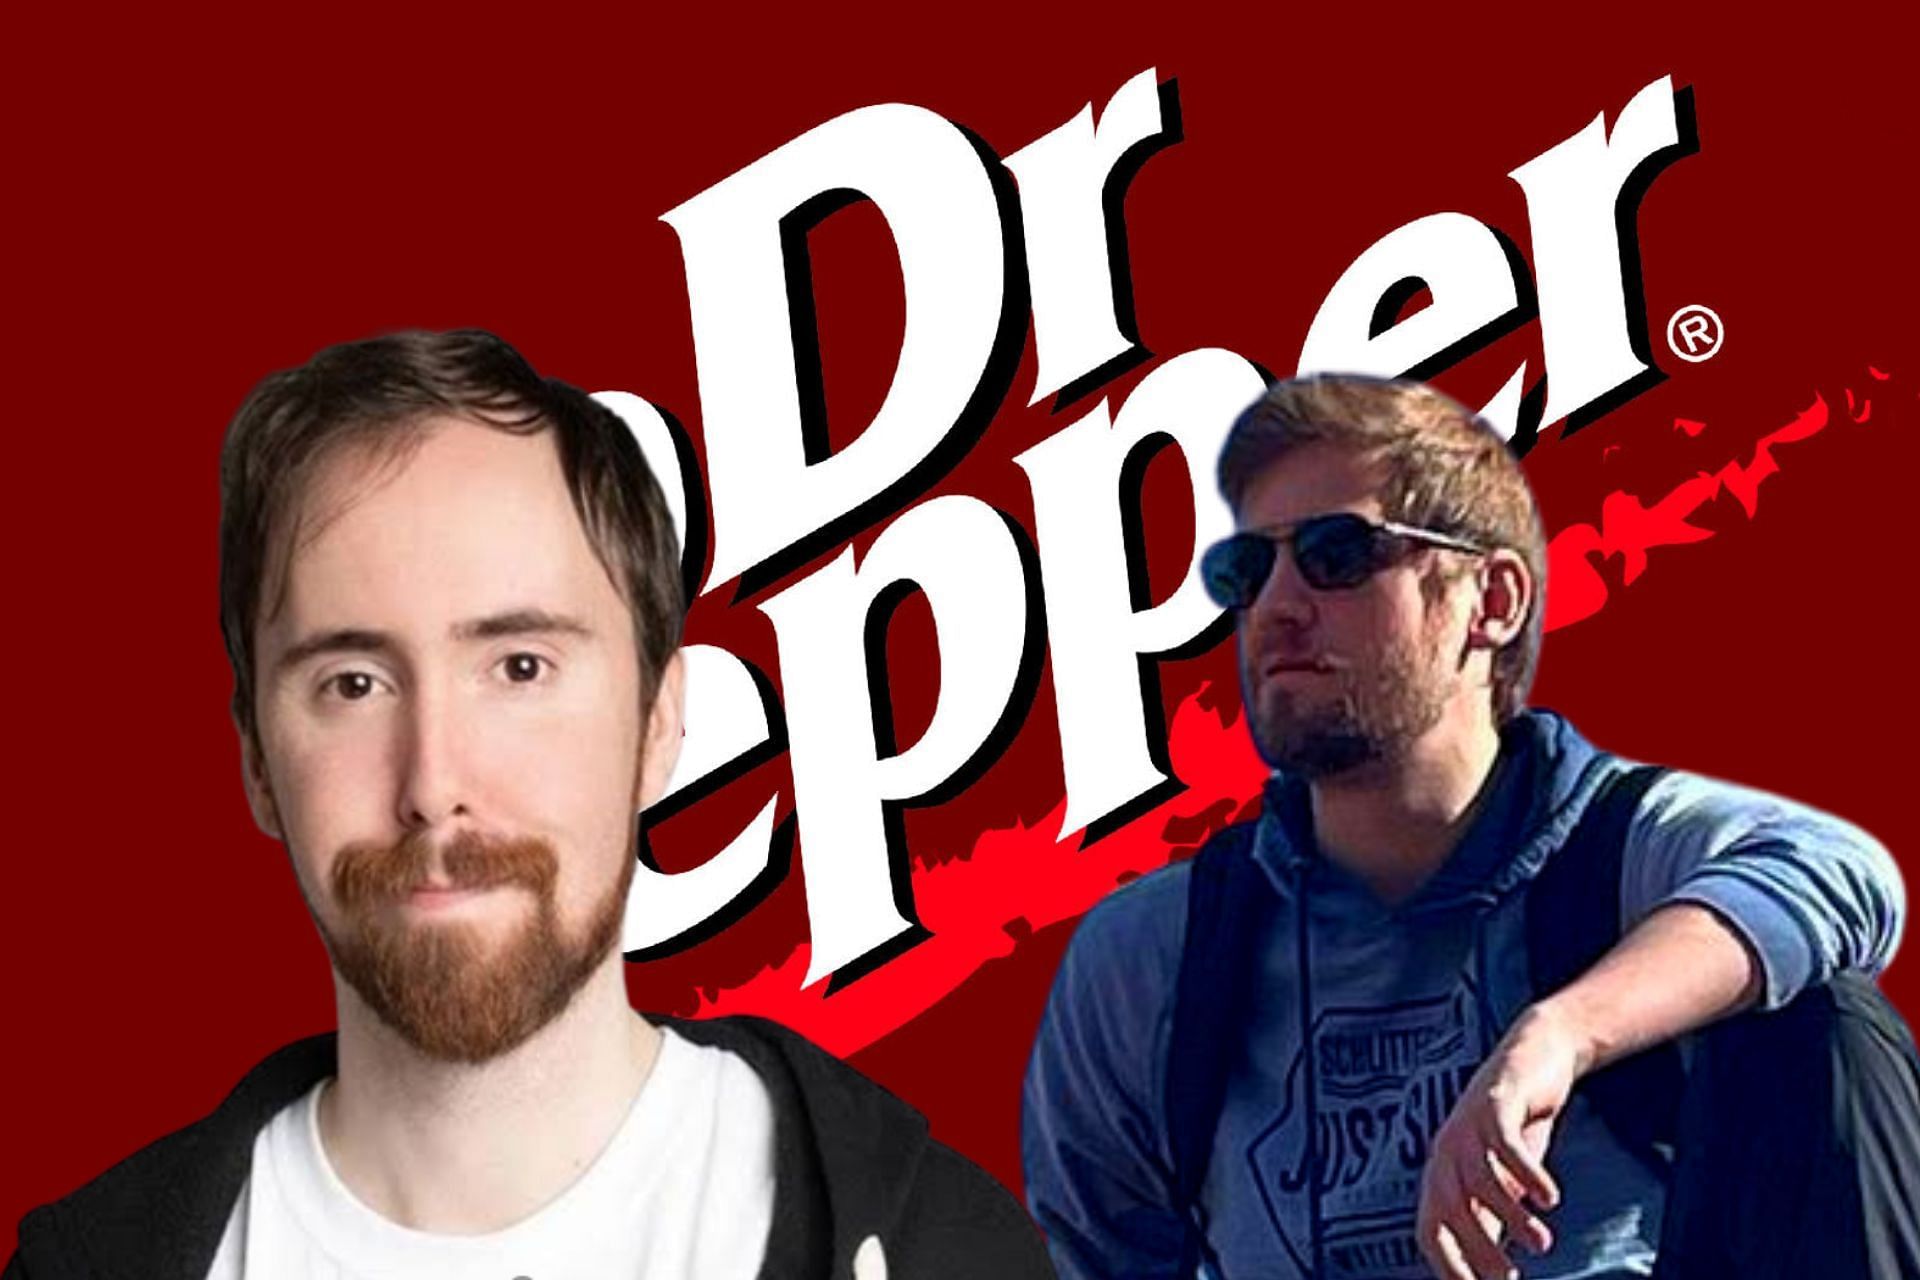 In a comical moment with Sodapoppin, Asmongold could not recognize the taste of the soda he frequently drinks: Dr Pepper (Image via Sportskeeda)